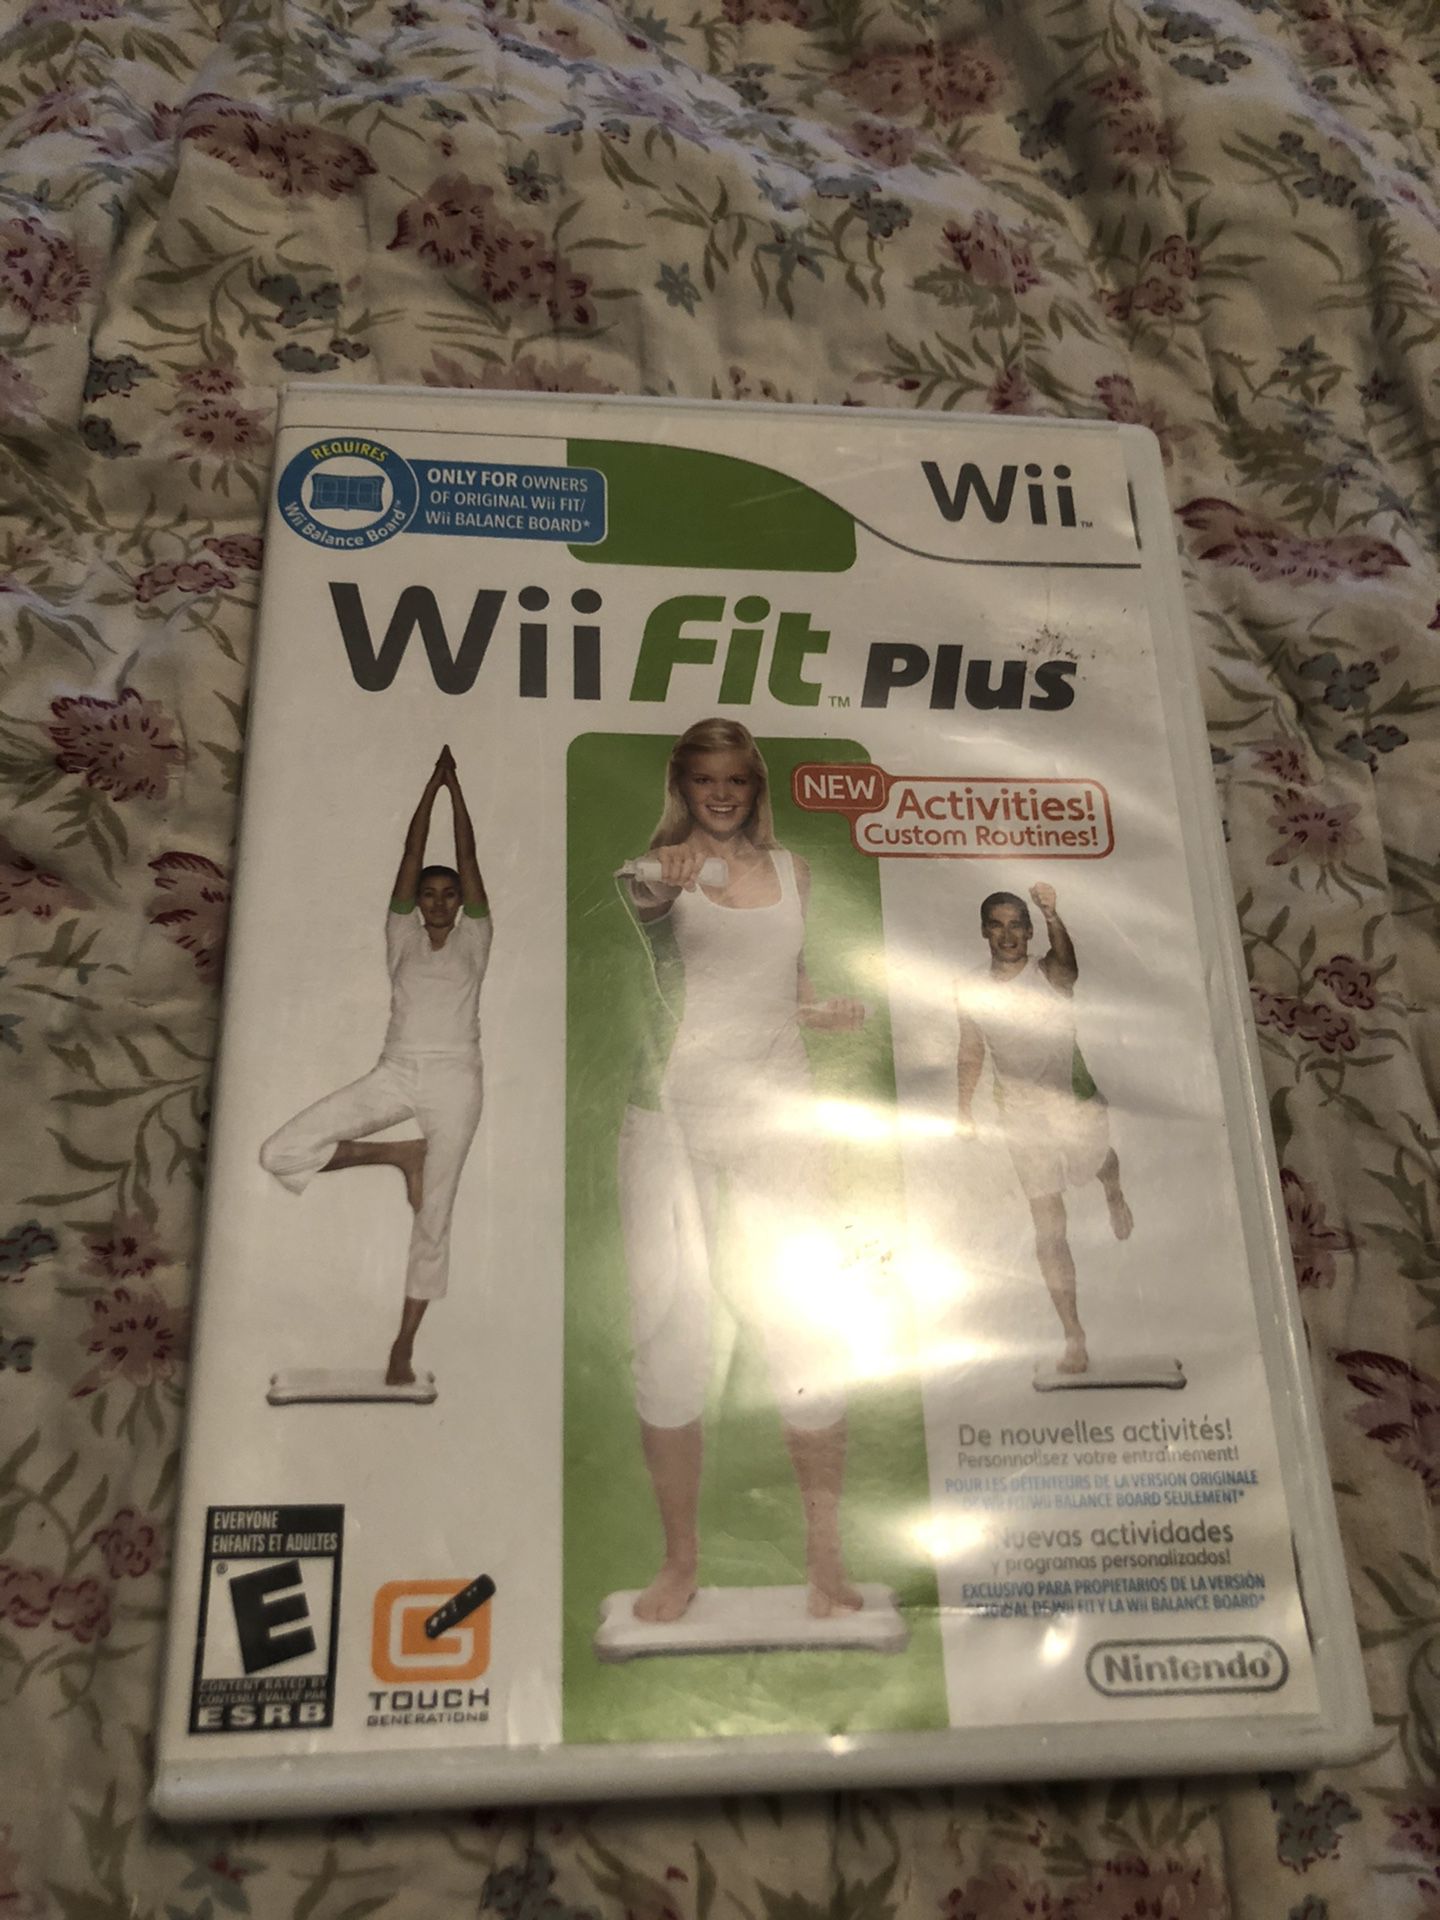 Wii fit Nintendo Wii fit plus shipping